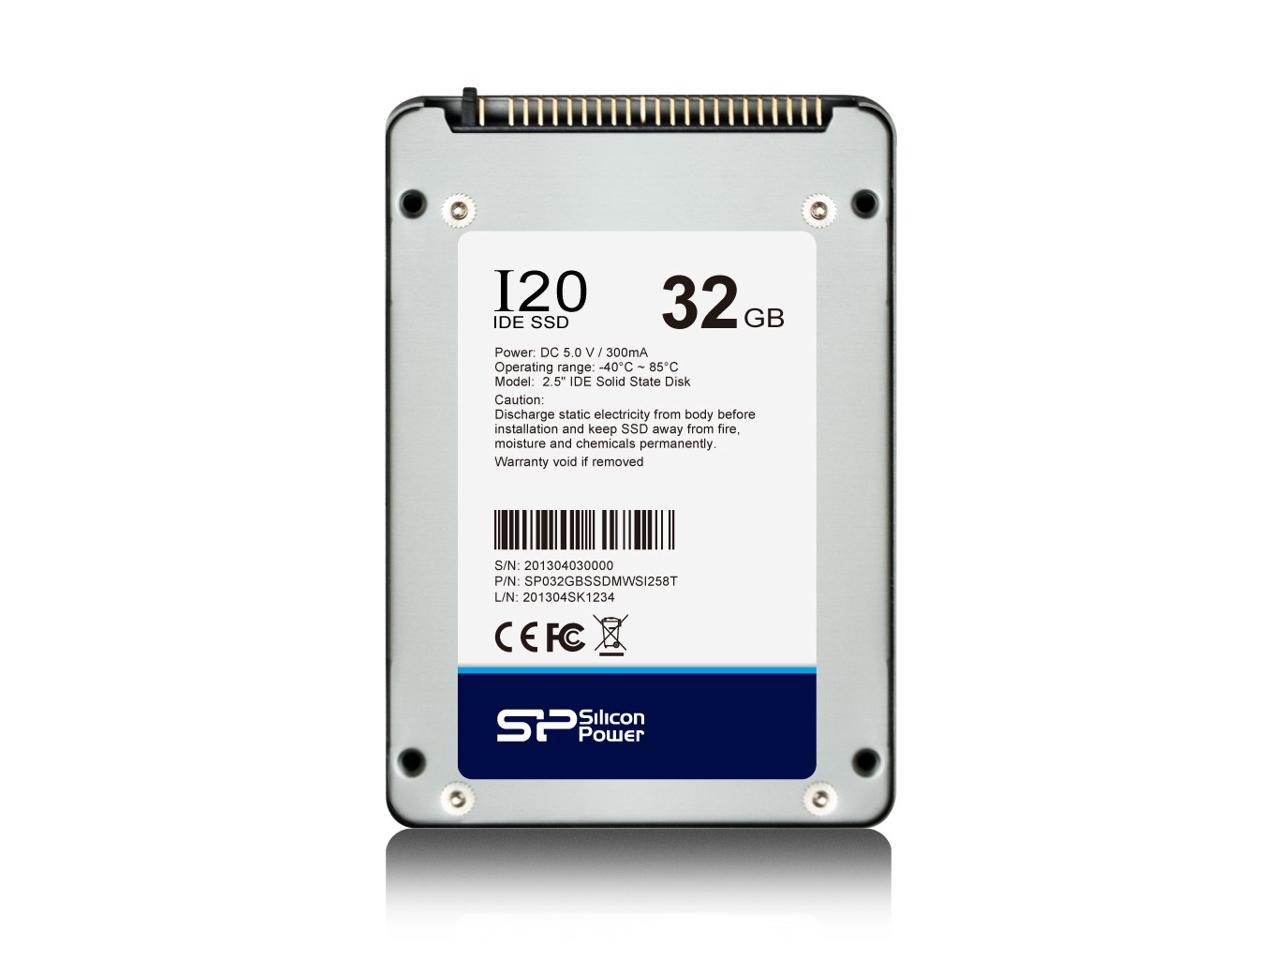 Silicon Power 32GB SSD-I20 2.5-inch IDE/PATA 9mm, Toshiba 19nm MLC Flash SSD Solid State Disk Model SP032GBSSDMMNI254T